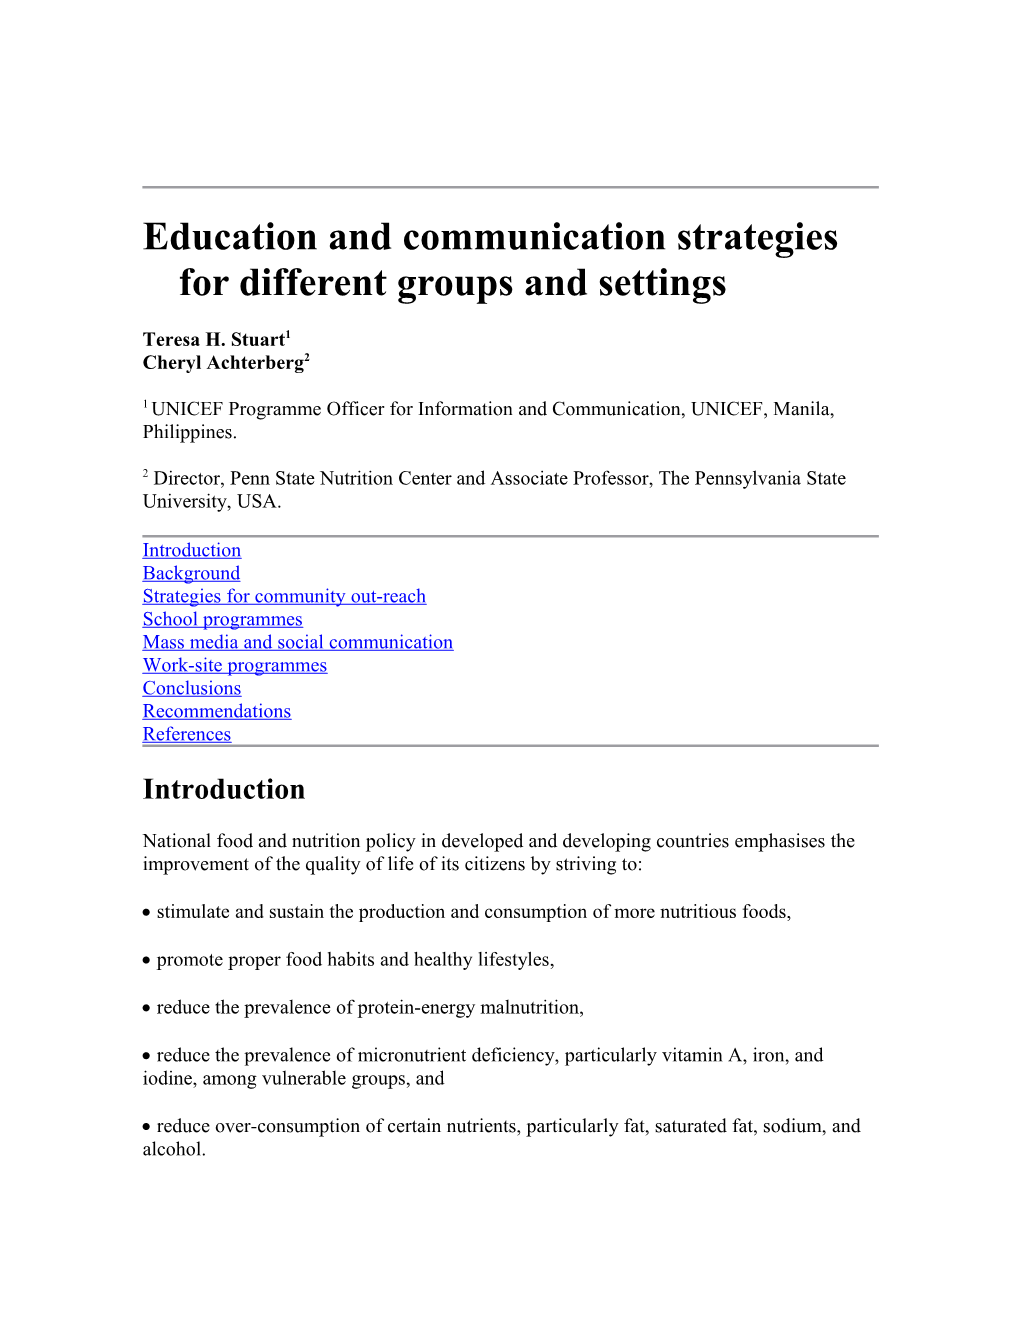 Education and Communication Strategies for Different Groups and Settings